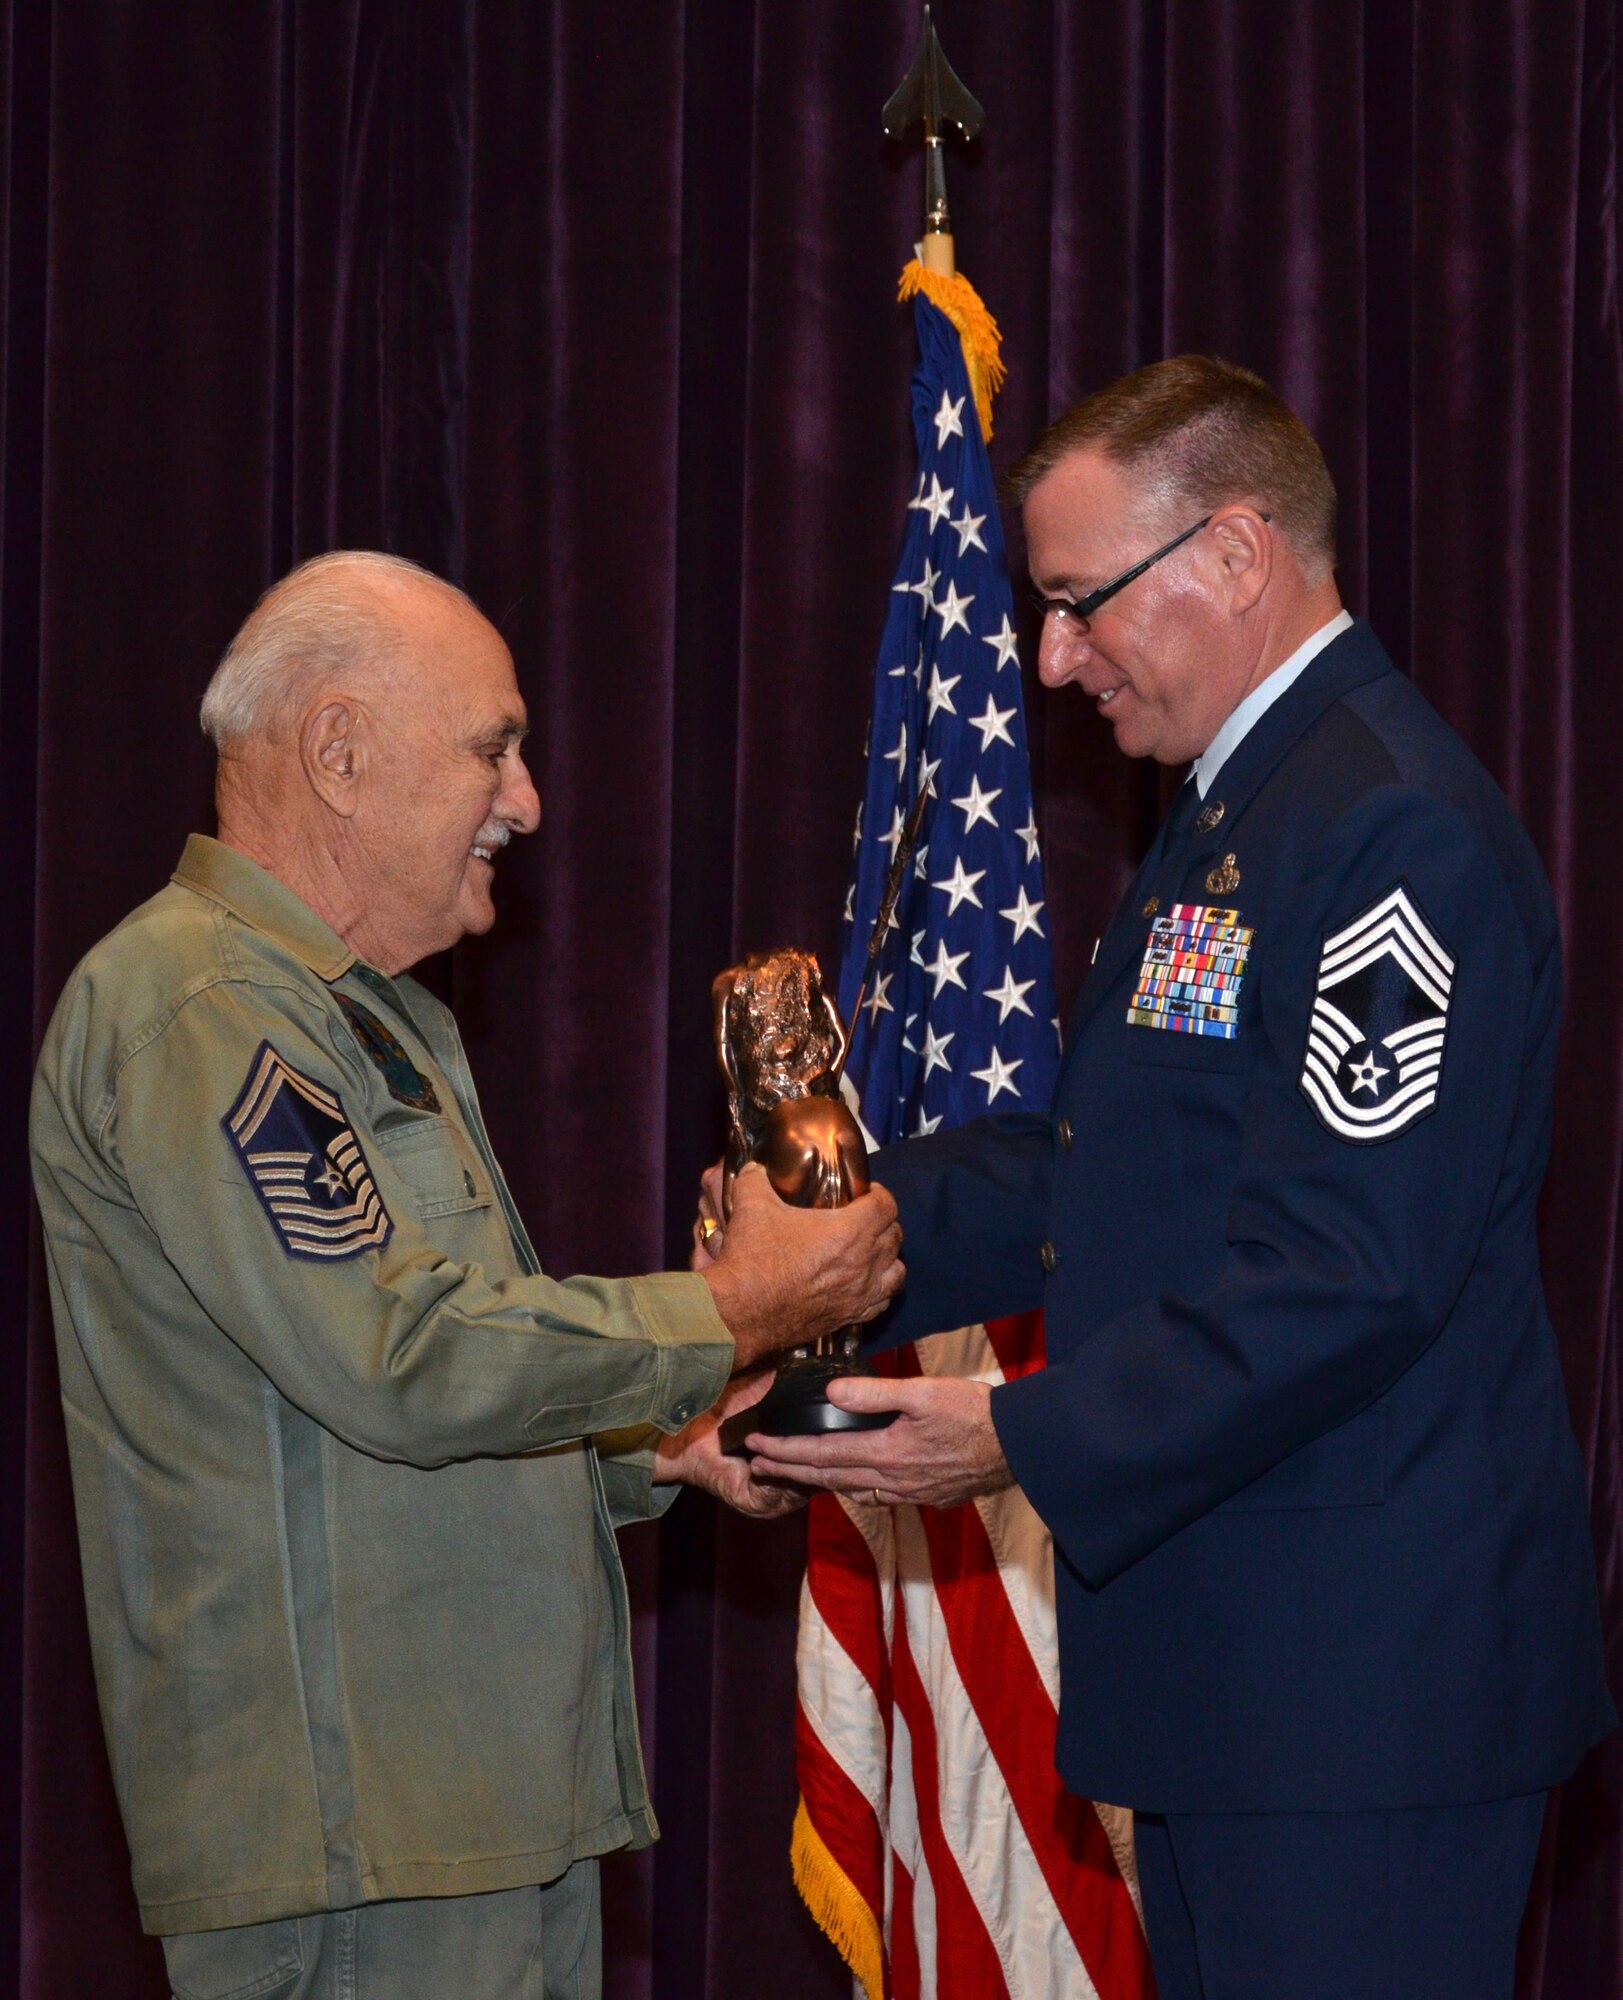 Chief Master Sgt. Joseph Pannitto passes the End of Trail statue to Chief Master Sgt. Philip Roe during Roe's retirement ceremony at Patrick Air Force Base, Fla., Sept. 10, 2016. The statue symbolizes Roe's transition into retirement after 36 years of military service. (U.S. Air Force photo by 1st Lt. Anna-Marie Wyant)